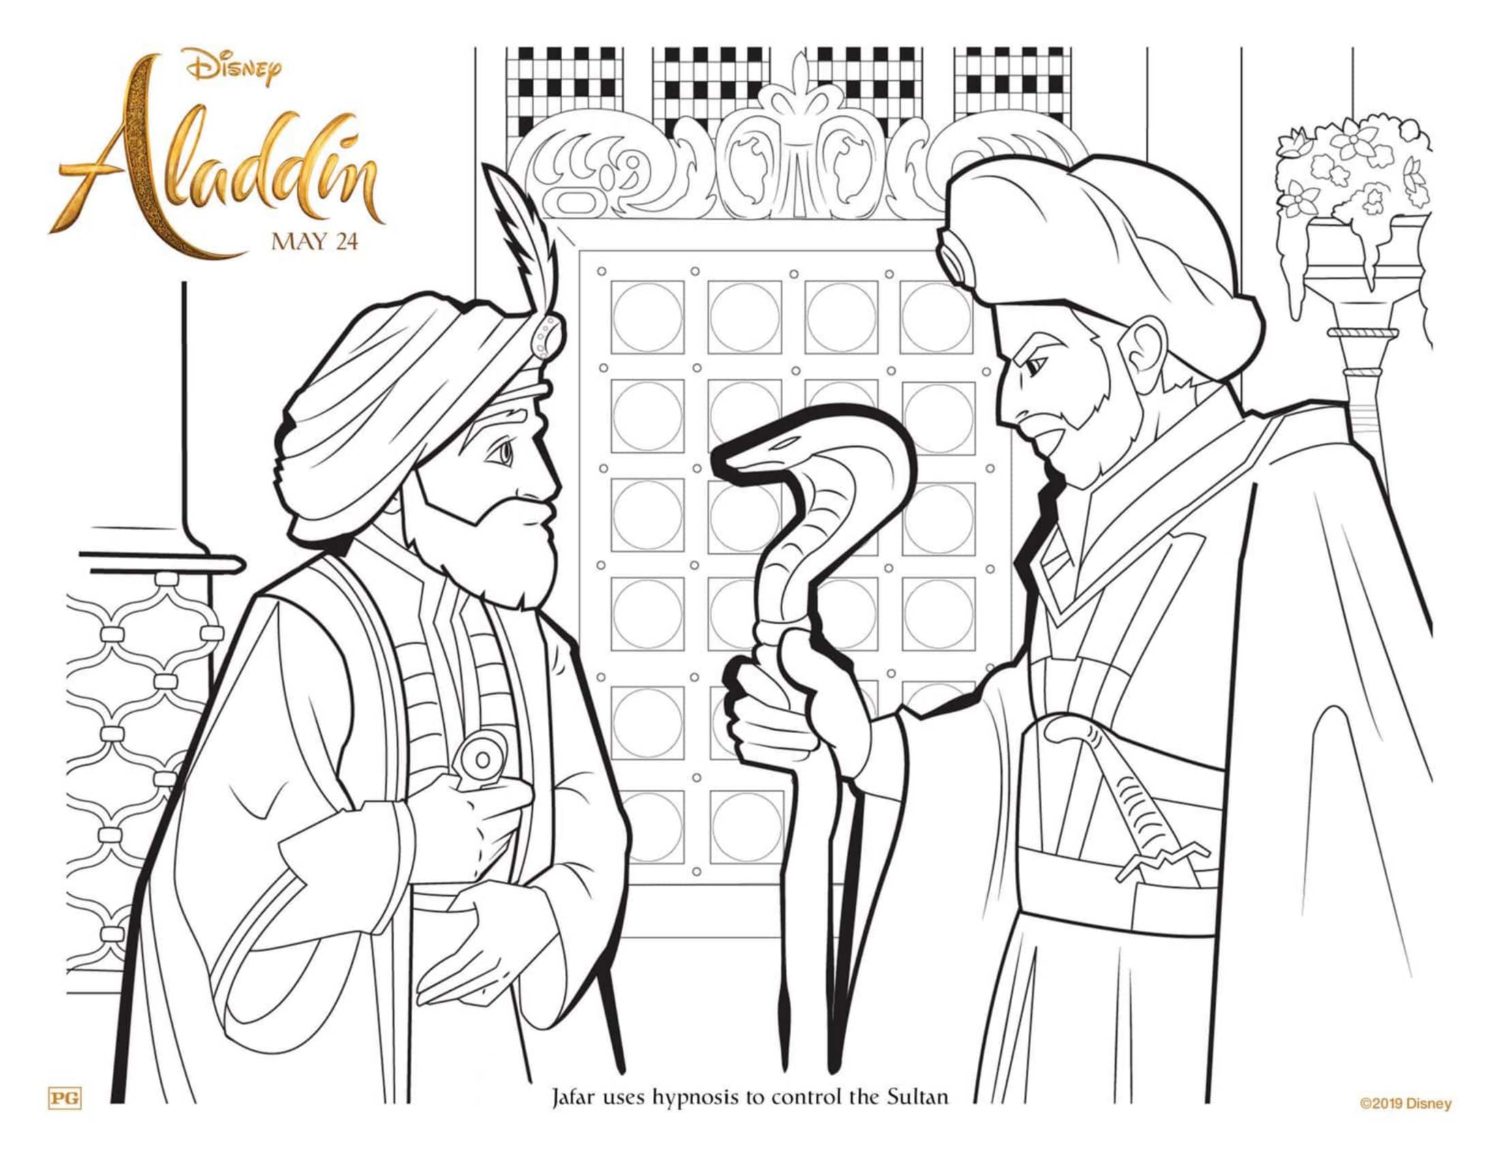 Jafar Hypnotizes the Sultan Coloring Page and Activity Sheet